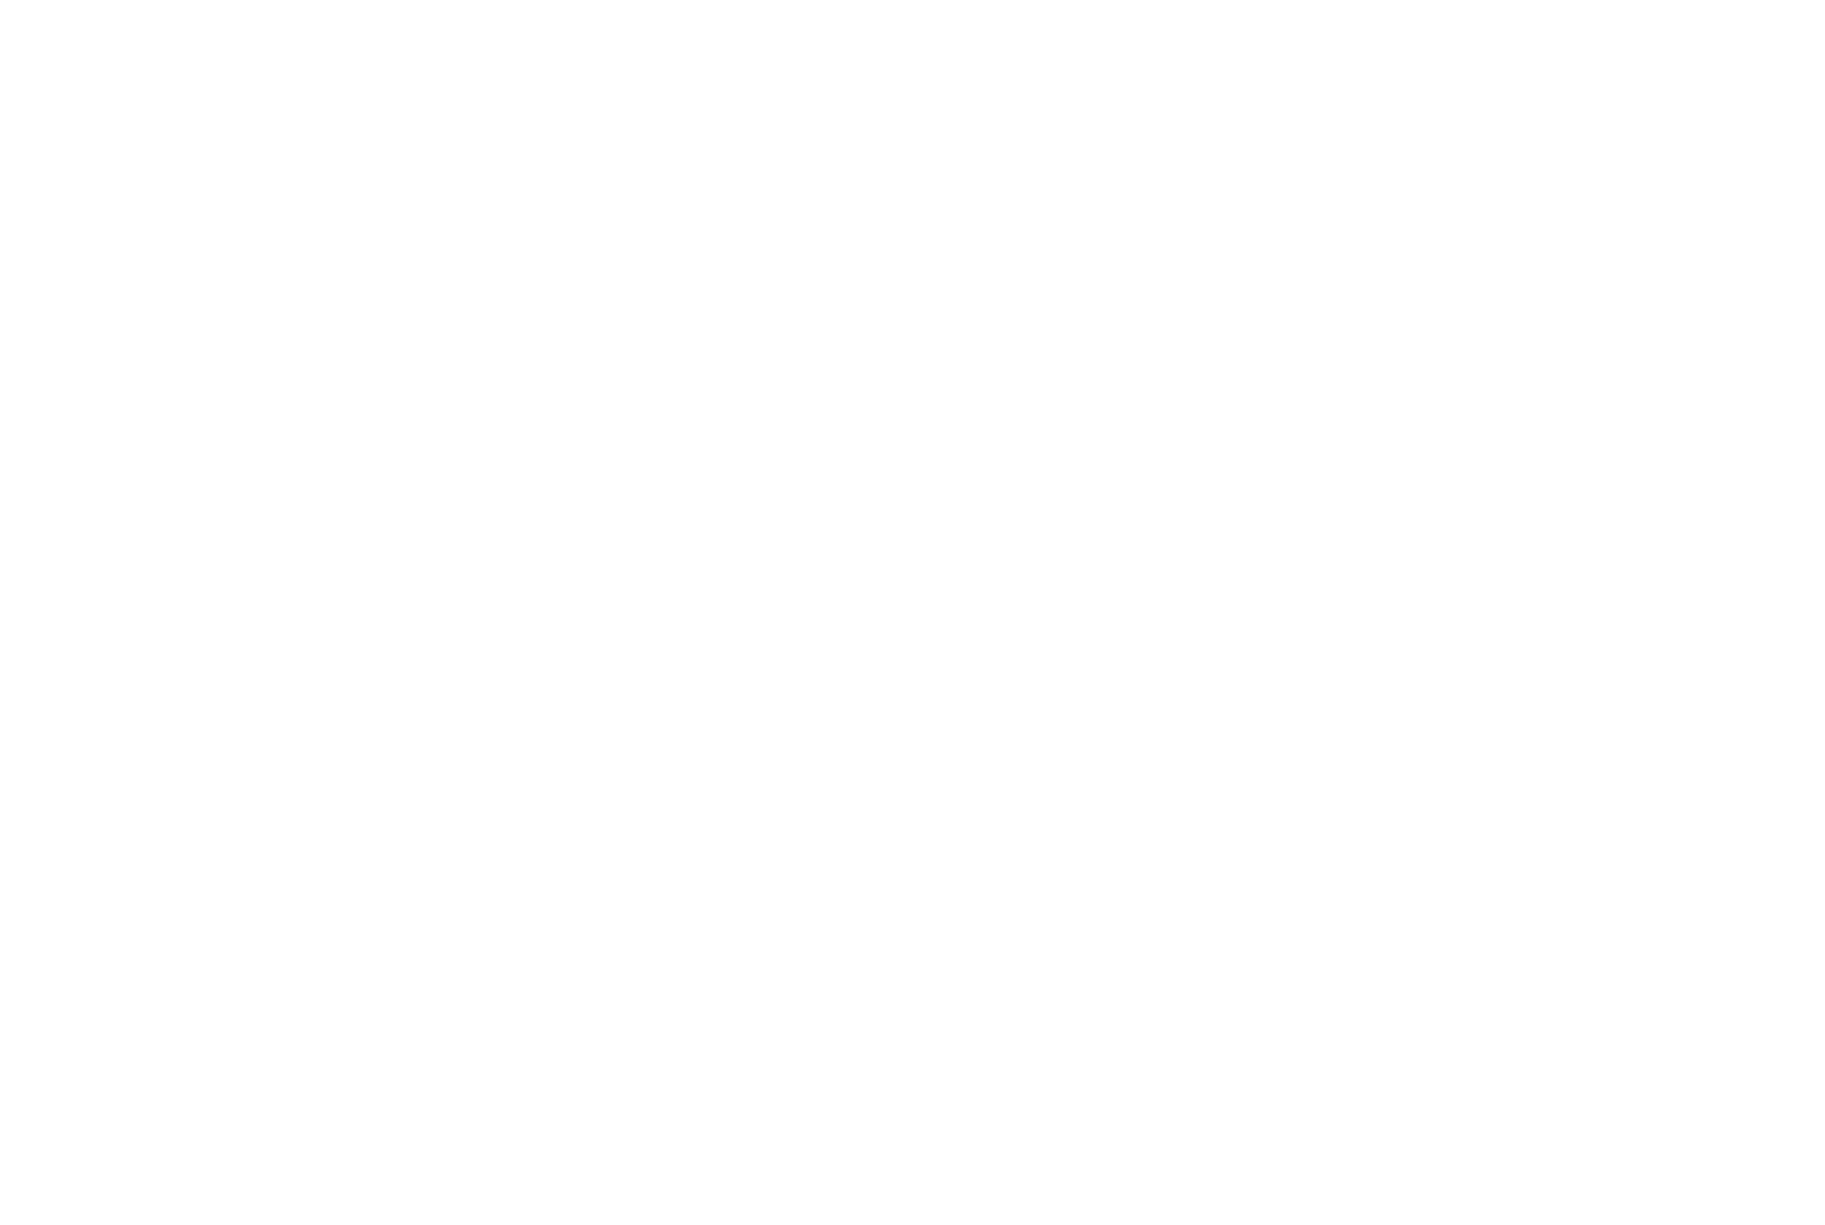 controller clipart wii